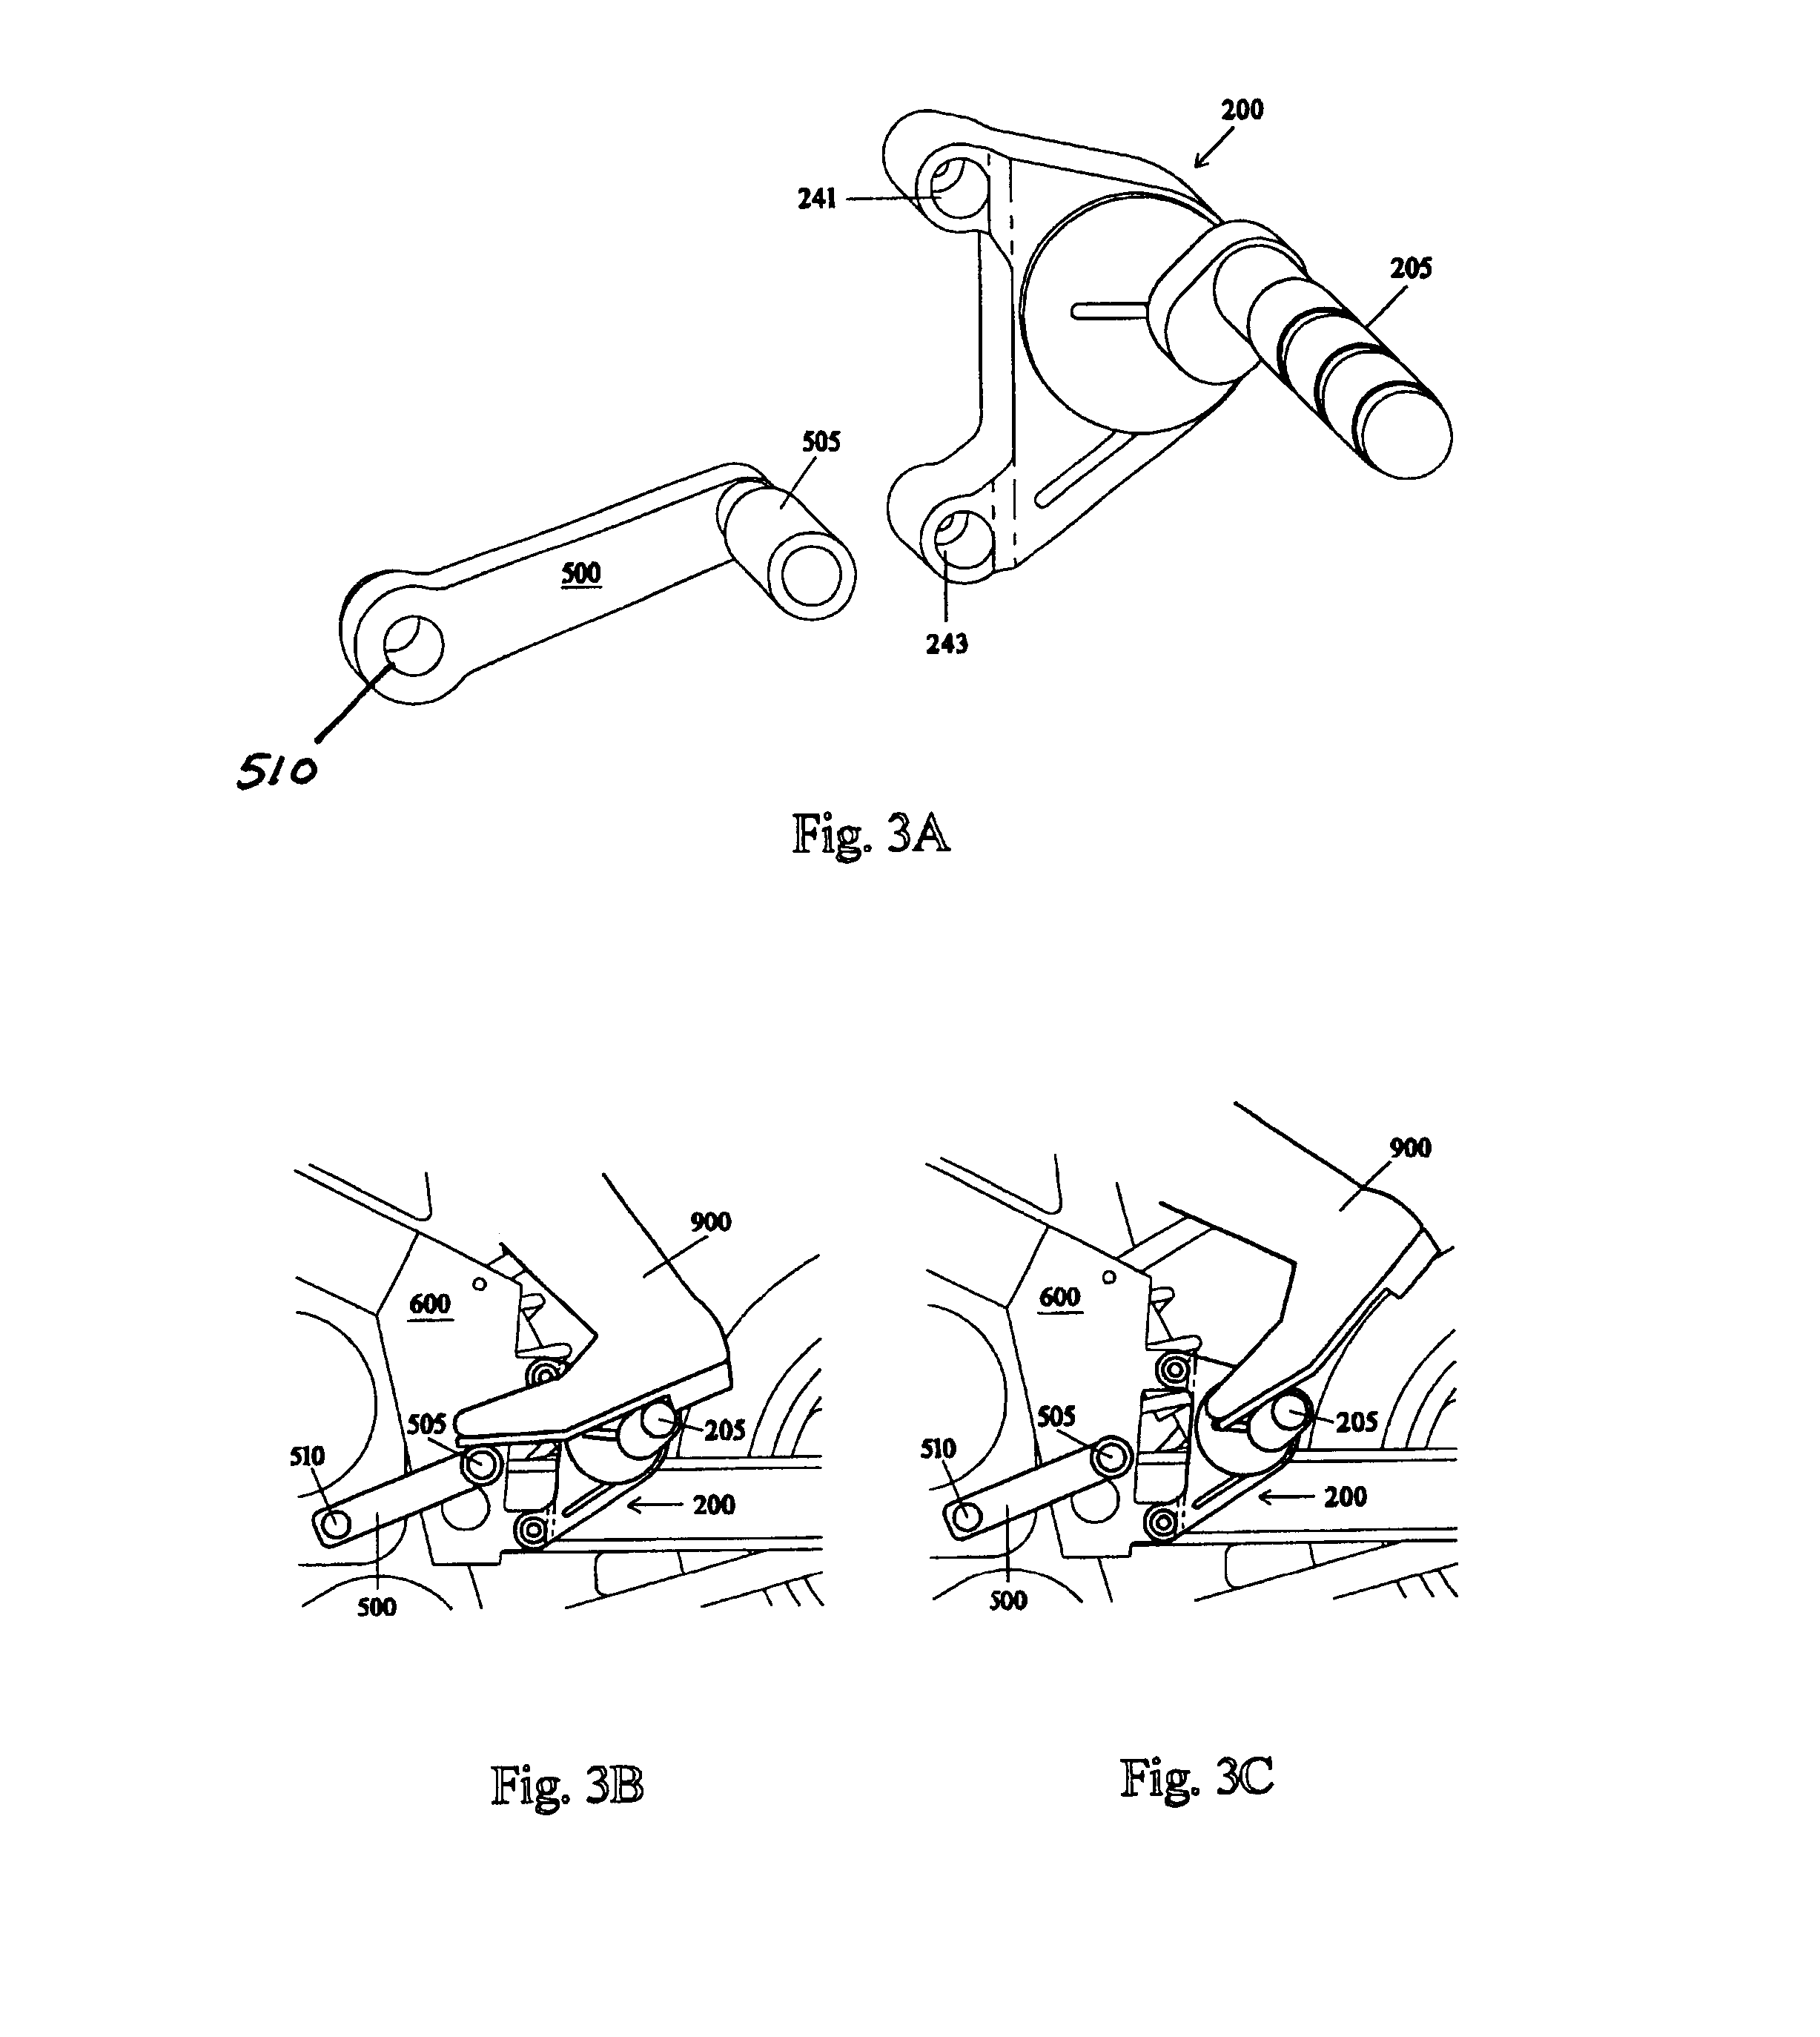 Apparatus and method of a dual eccentric adjustable motorcycle footrest